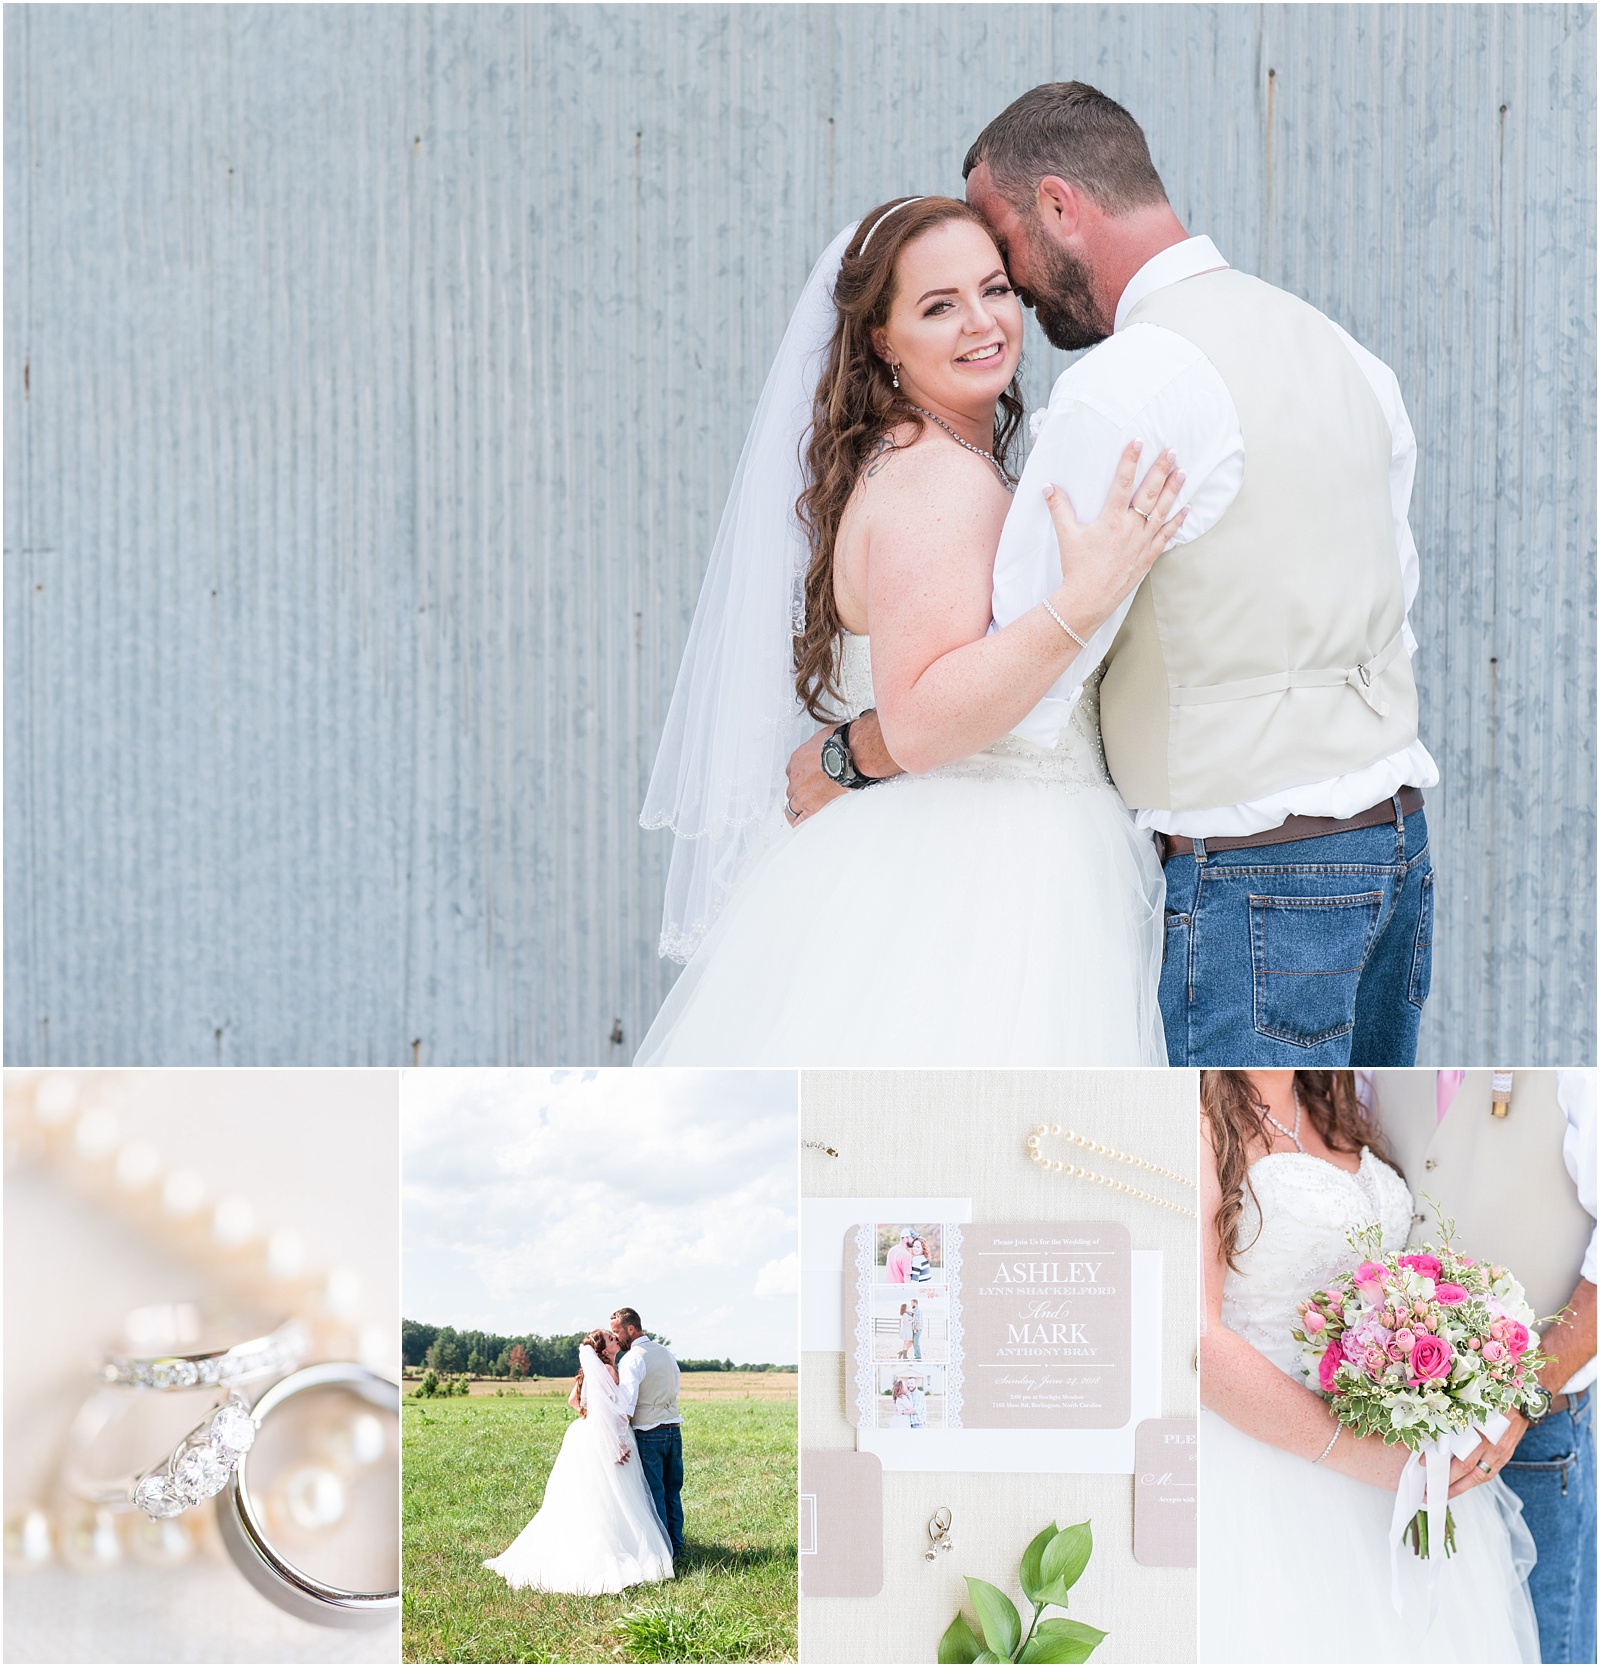 a group collague of an outdoor wedding with a couple, details of the rings and bridal bouquet, and wedding invitation at Starlight Meadow